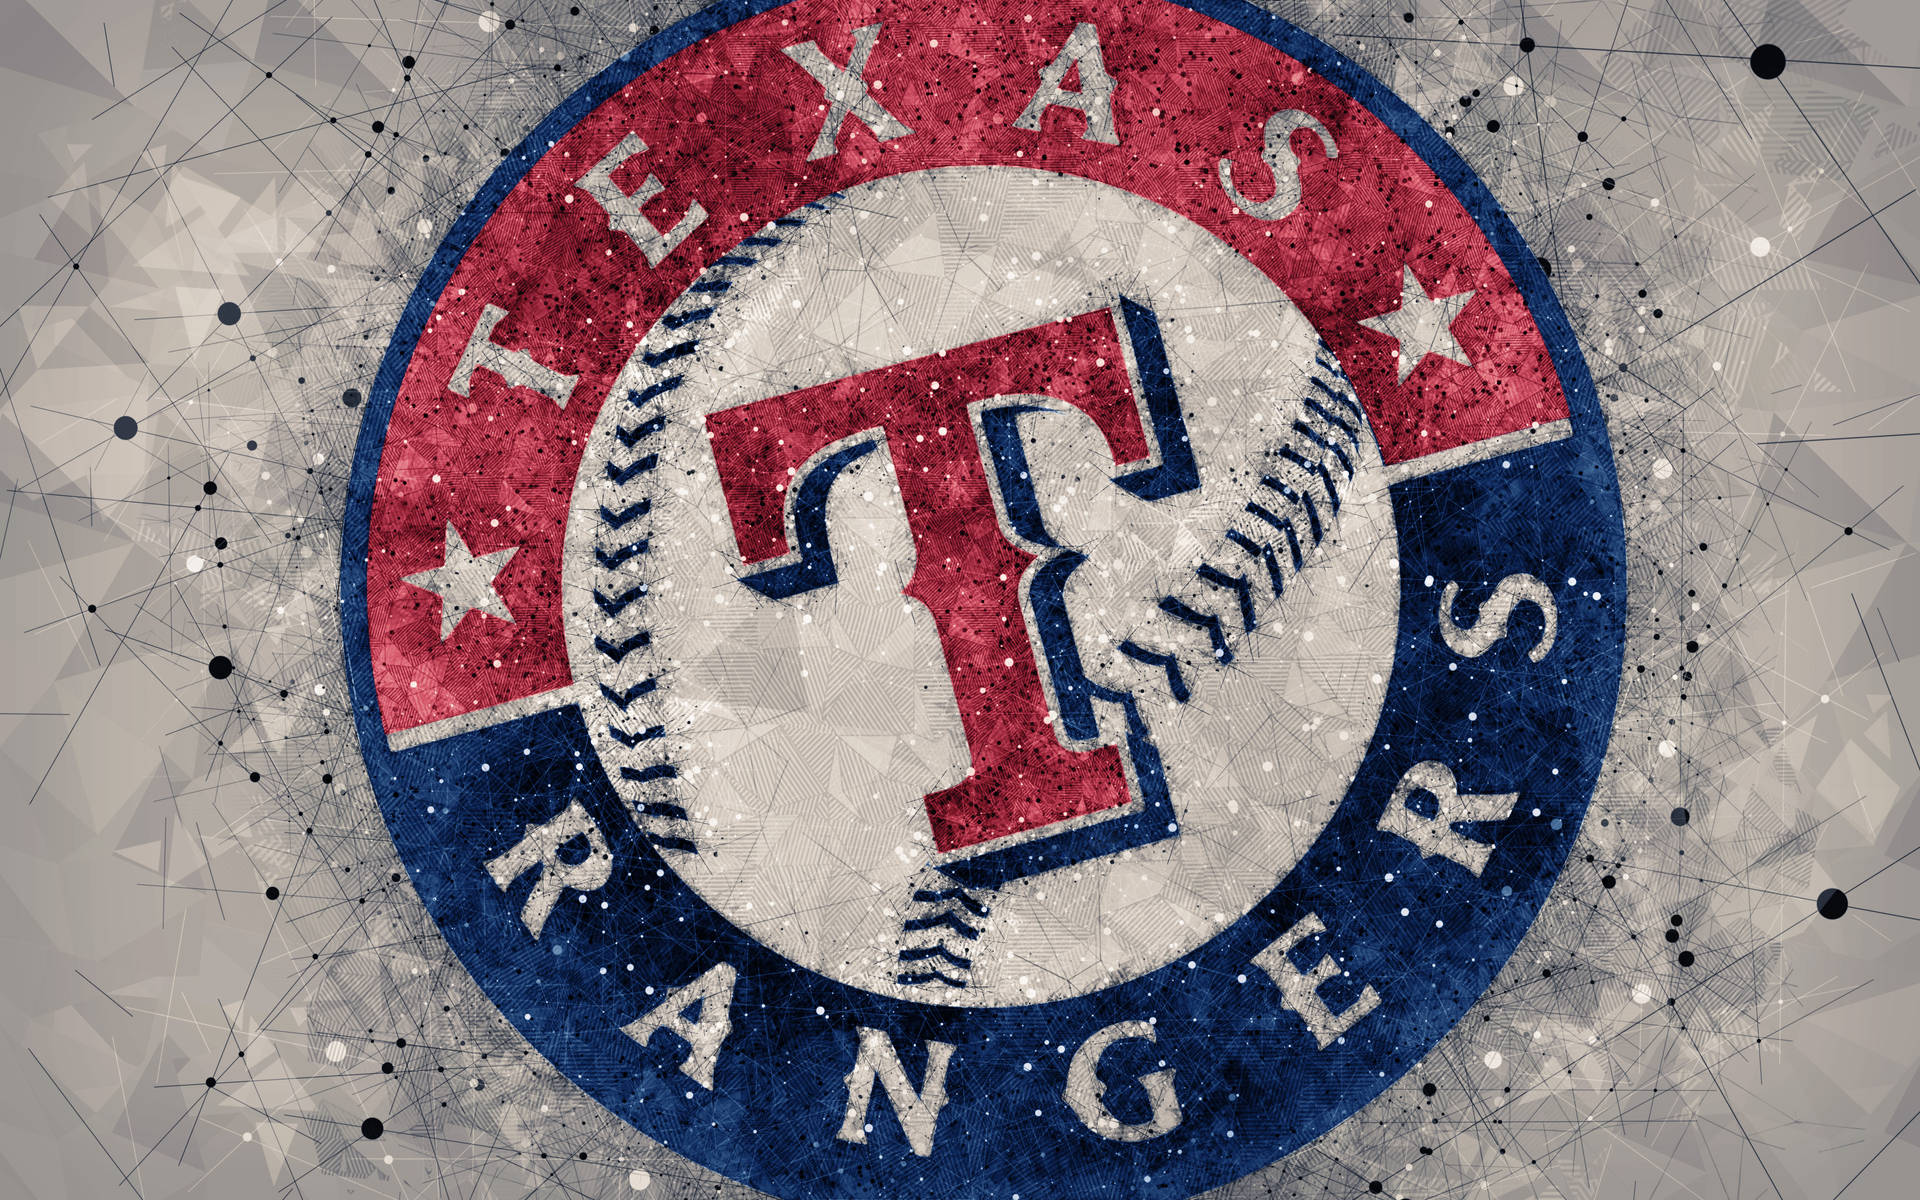 Top 999+ Texas Rangers Wallpapers Full HD, 4K✅Free to Use